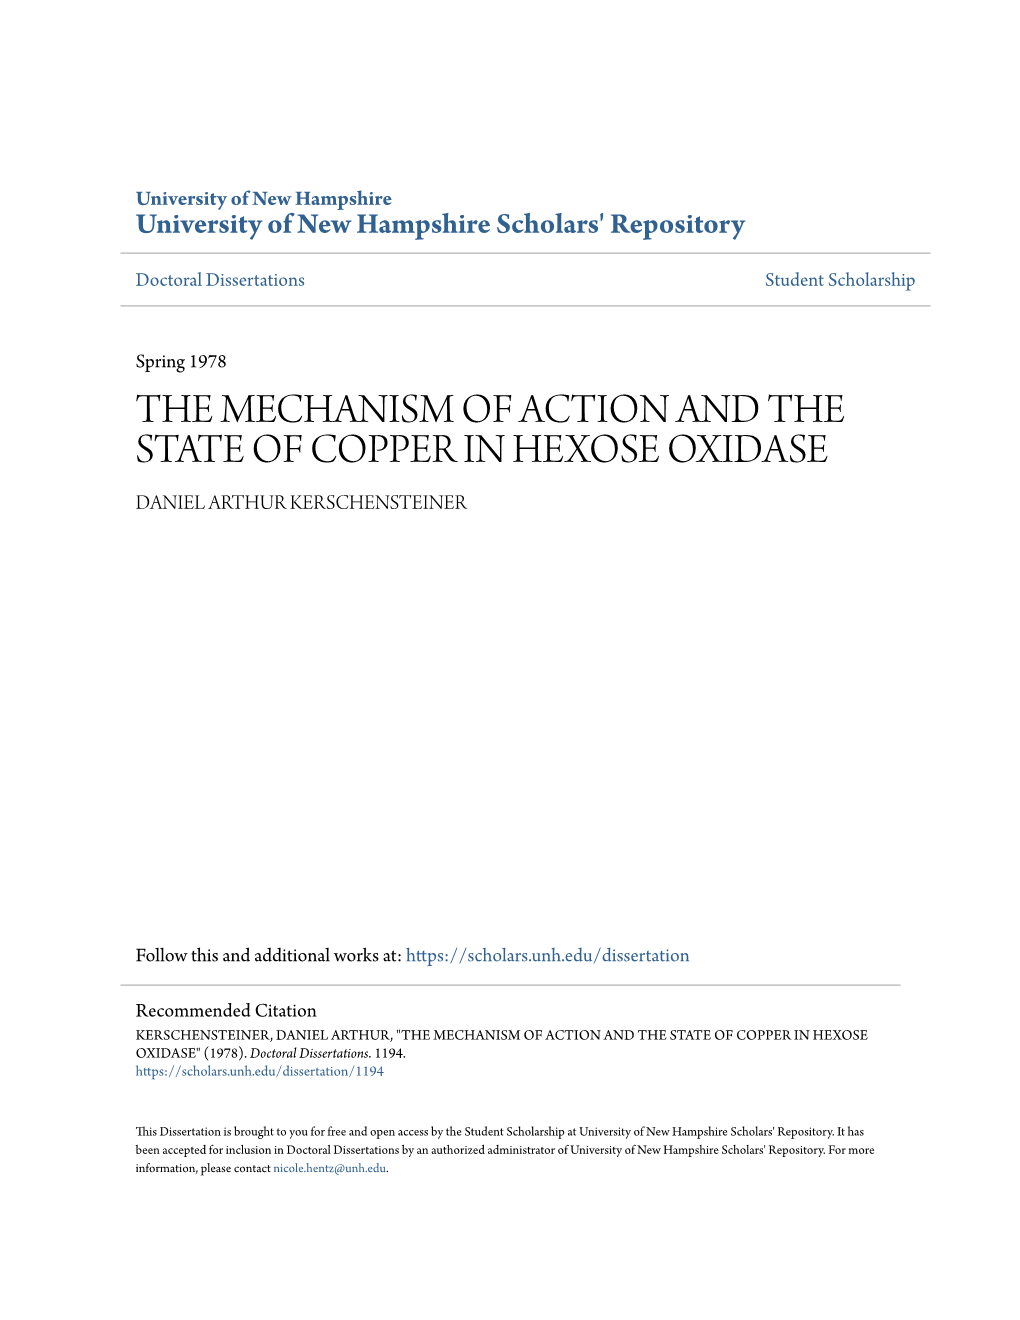 The Mechanism of Action and the State of Copper in Hexose Oxidase Daniel Arthur Kerschensteiner